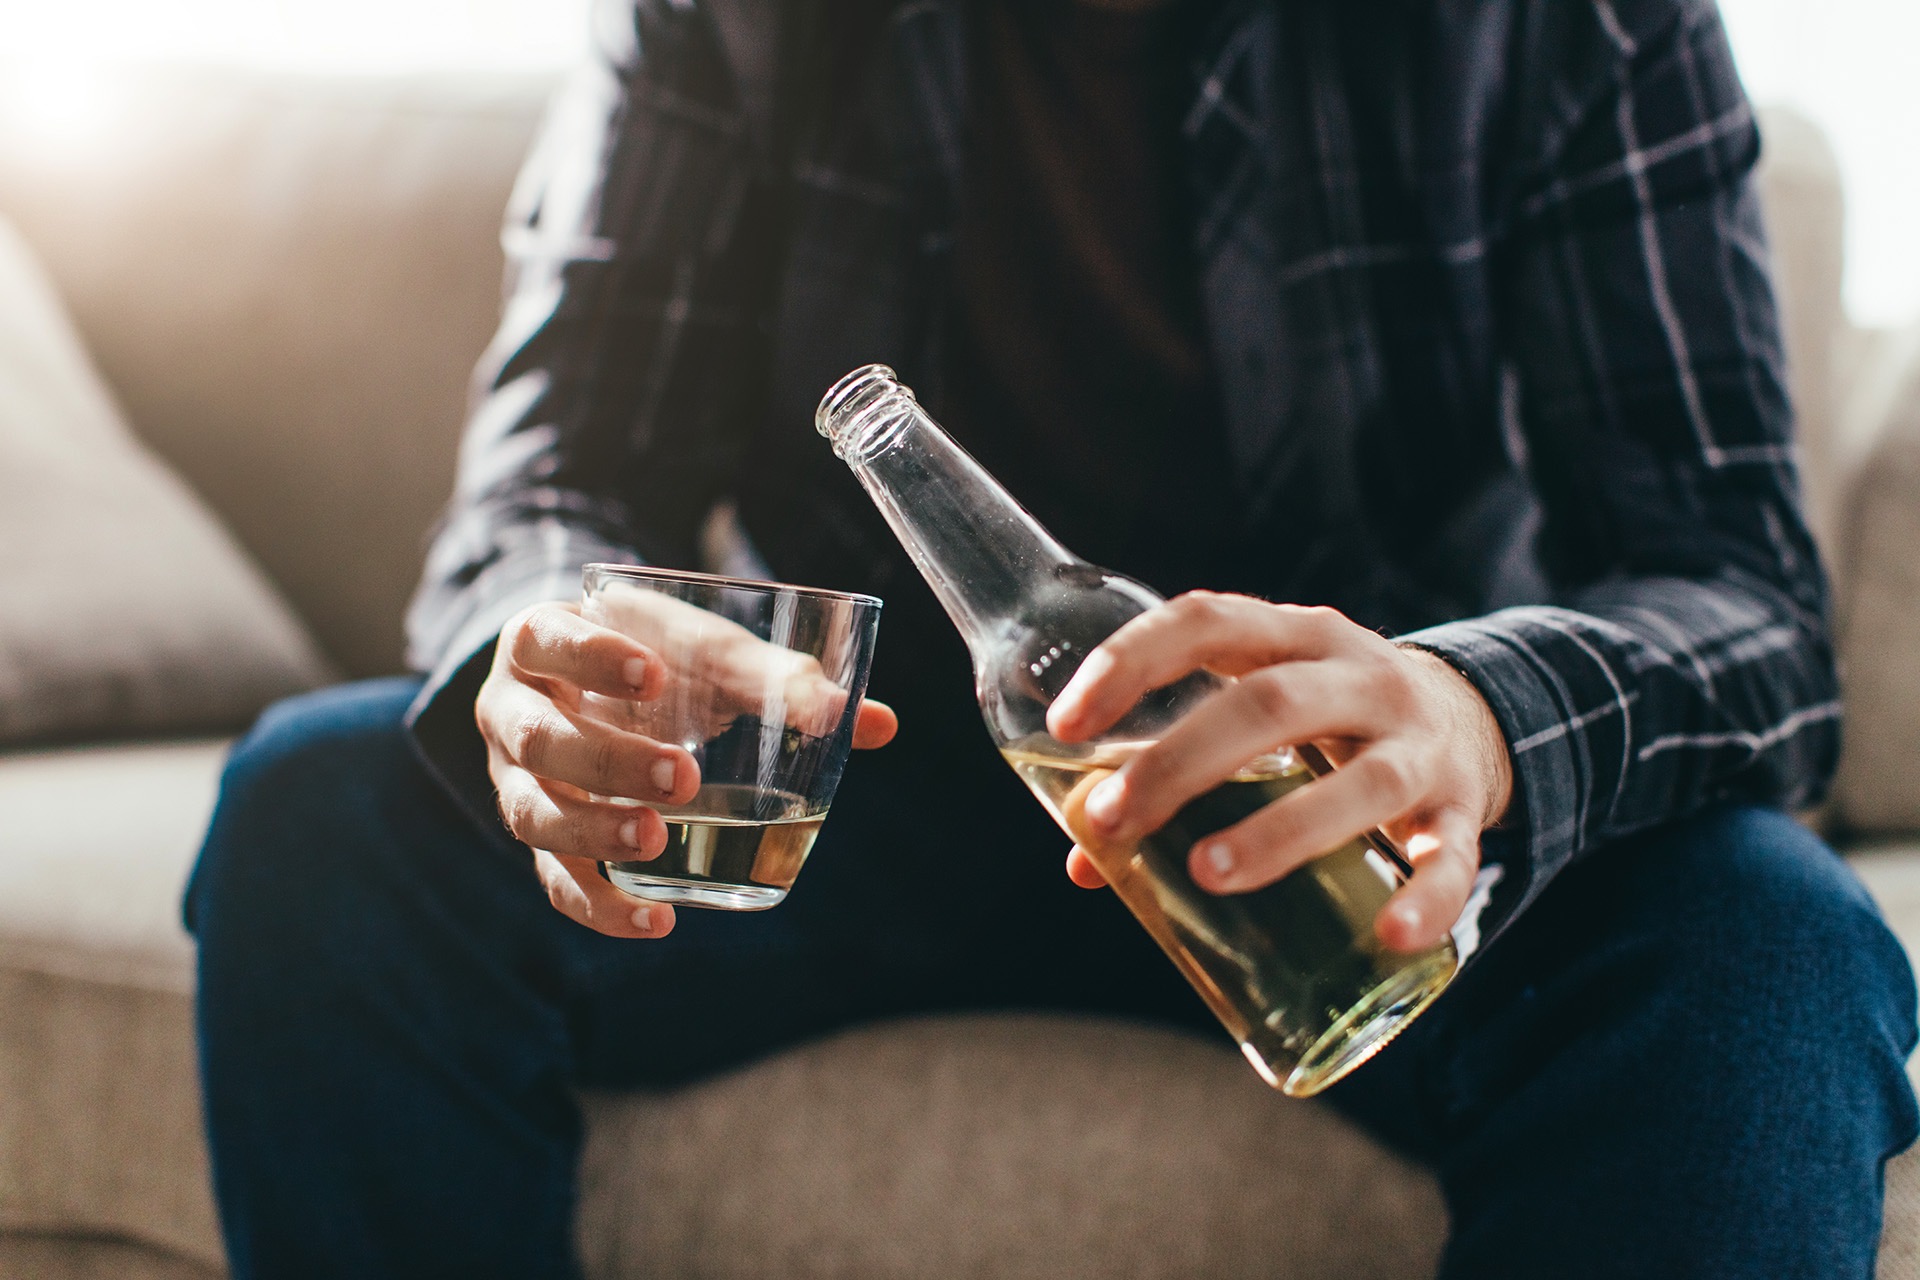 5 Signs You Have a Drug or Alcohol Addiction